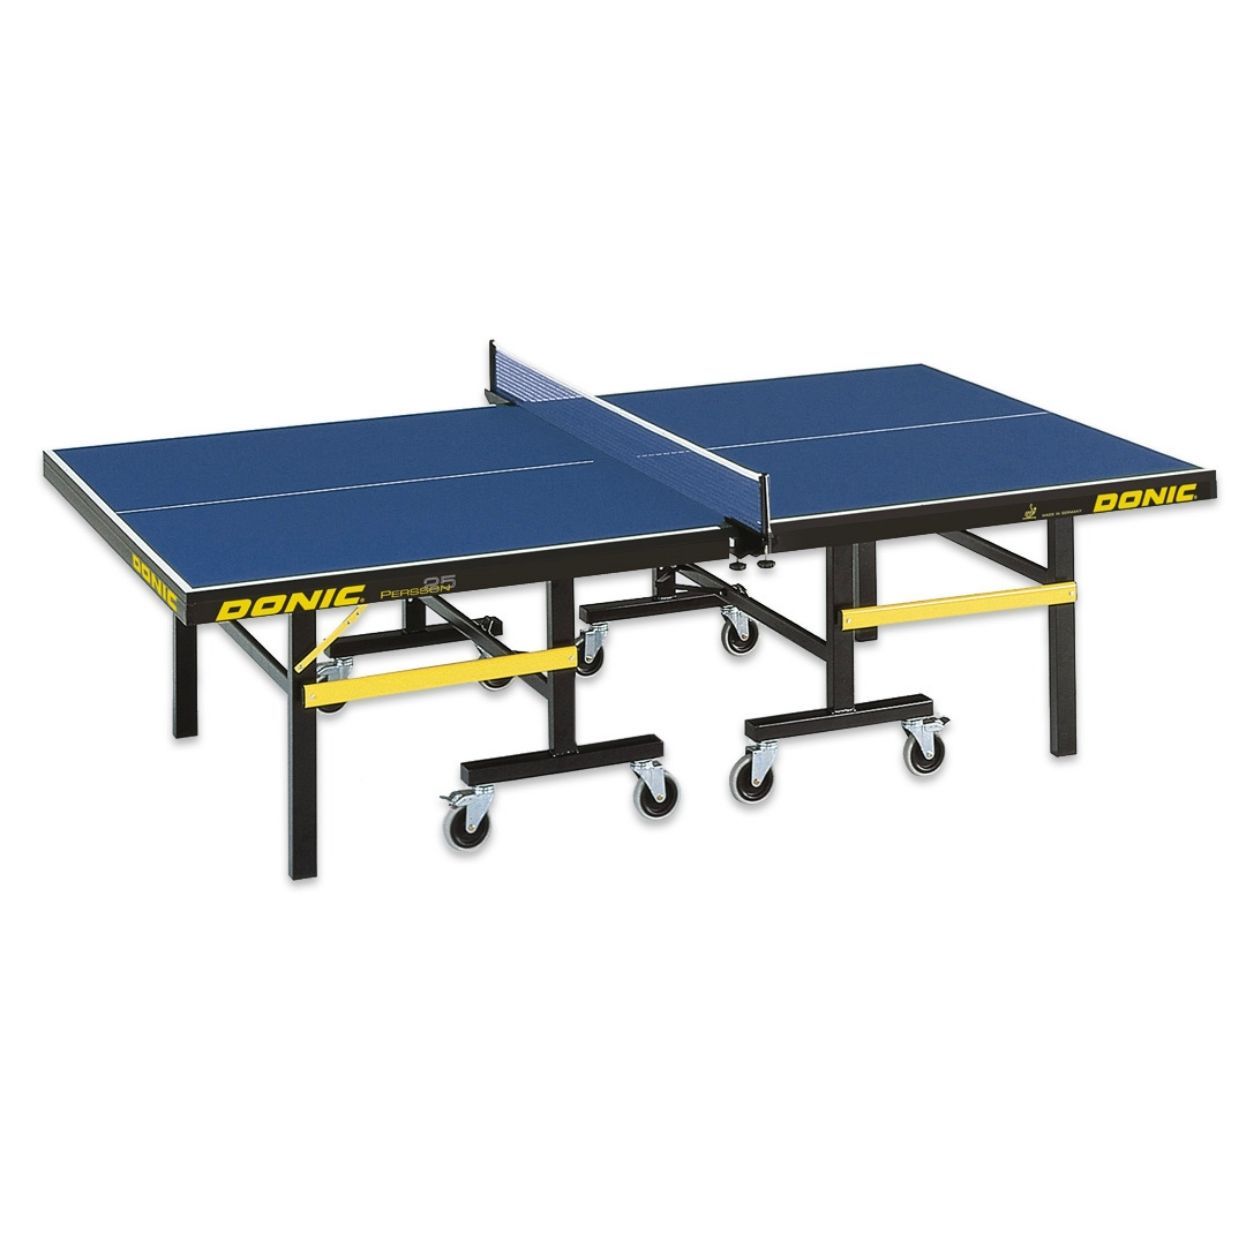 Donic Persson 25 Table Tennis Table 1